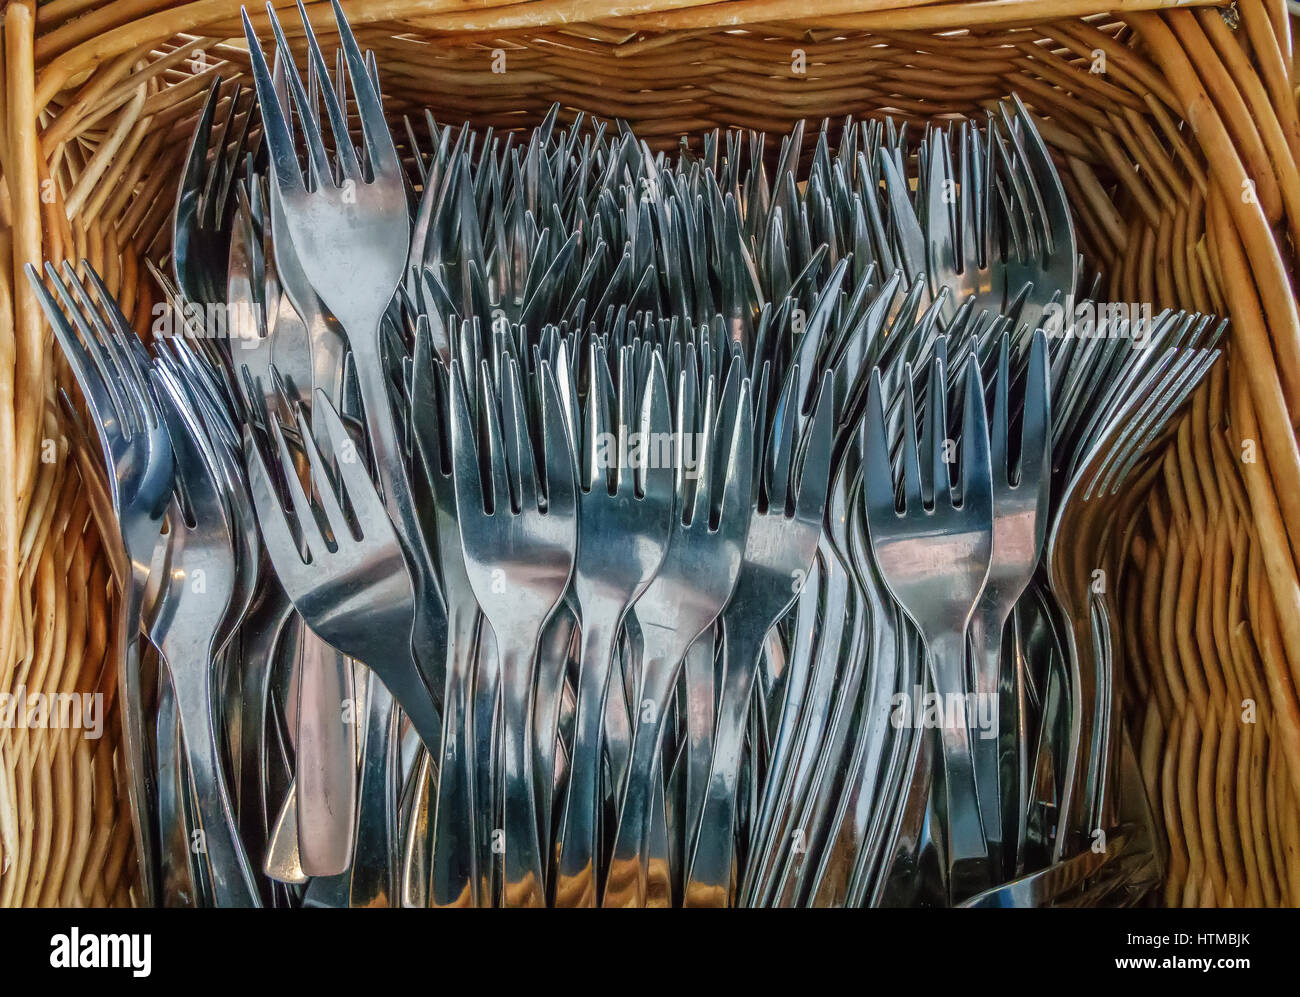 Forks in a basket Stock Photo